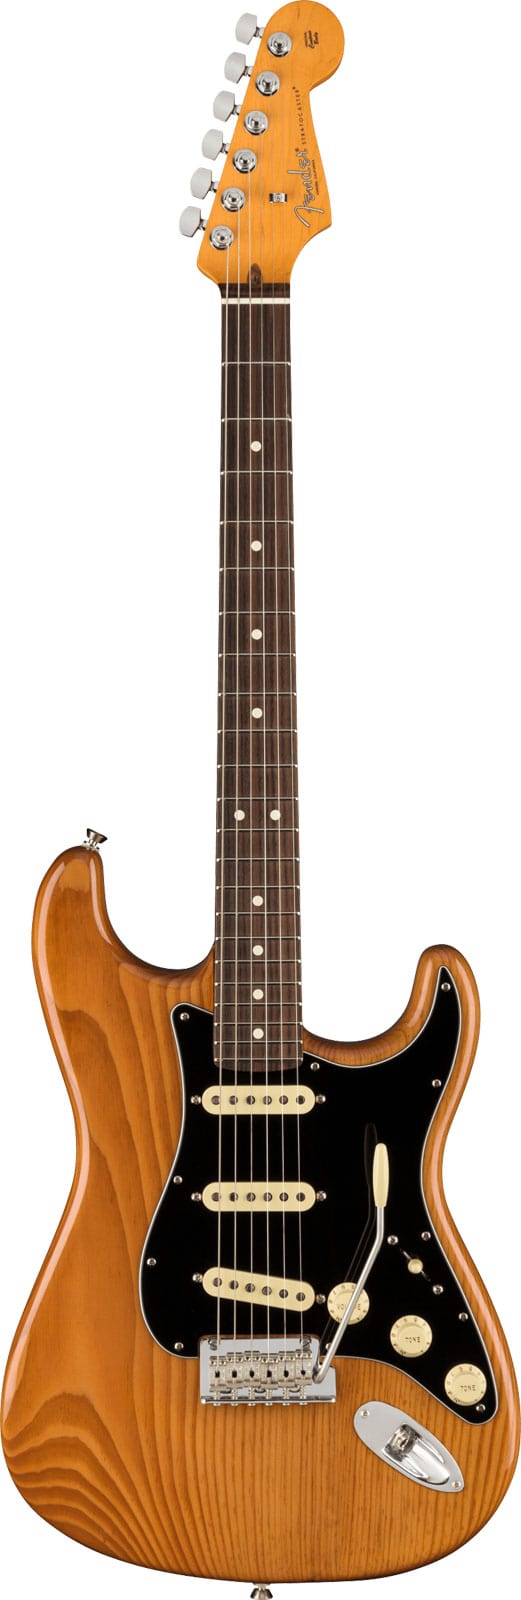 FENDER AMERICAN PROFESSIONAL II STRATOCASTER RW, ROASTED PINE